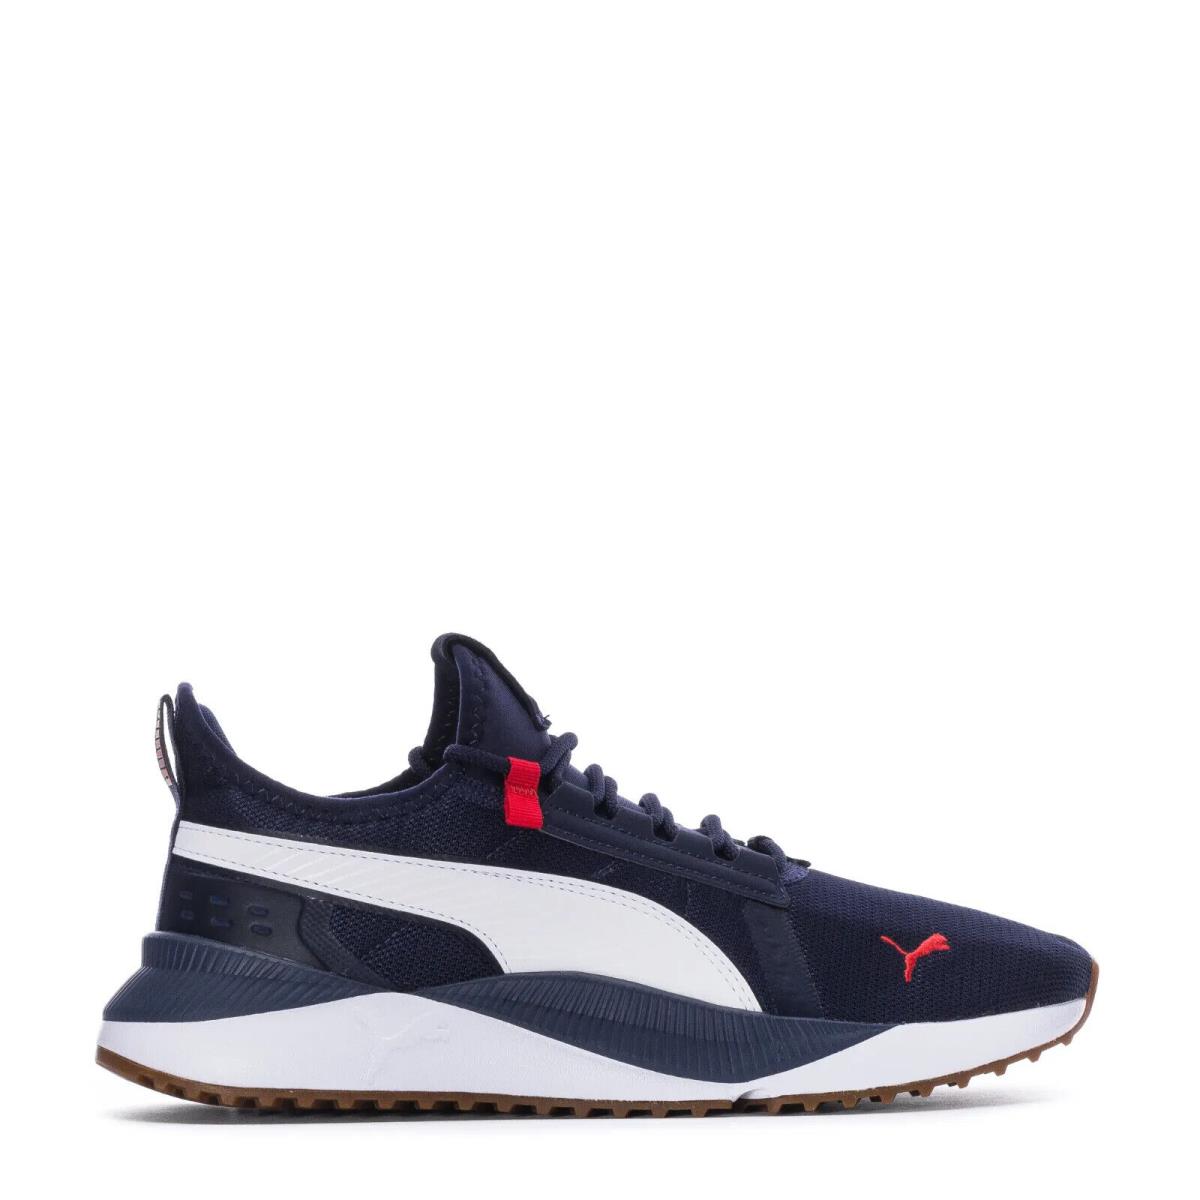 Puma Pacer Future Street Plus 384634-04 Peacoat/white/high Risk Red Shoes - Blue